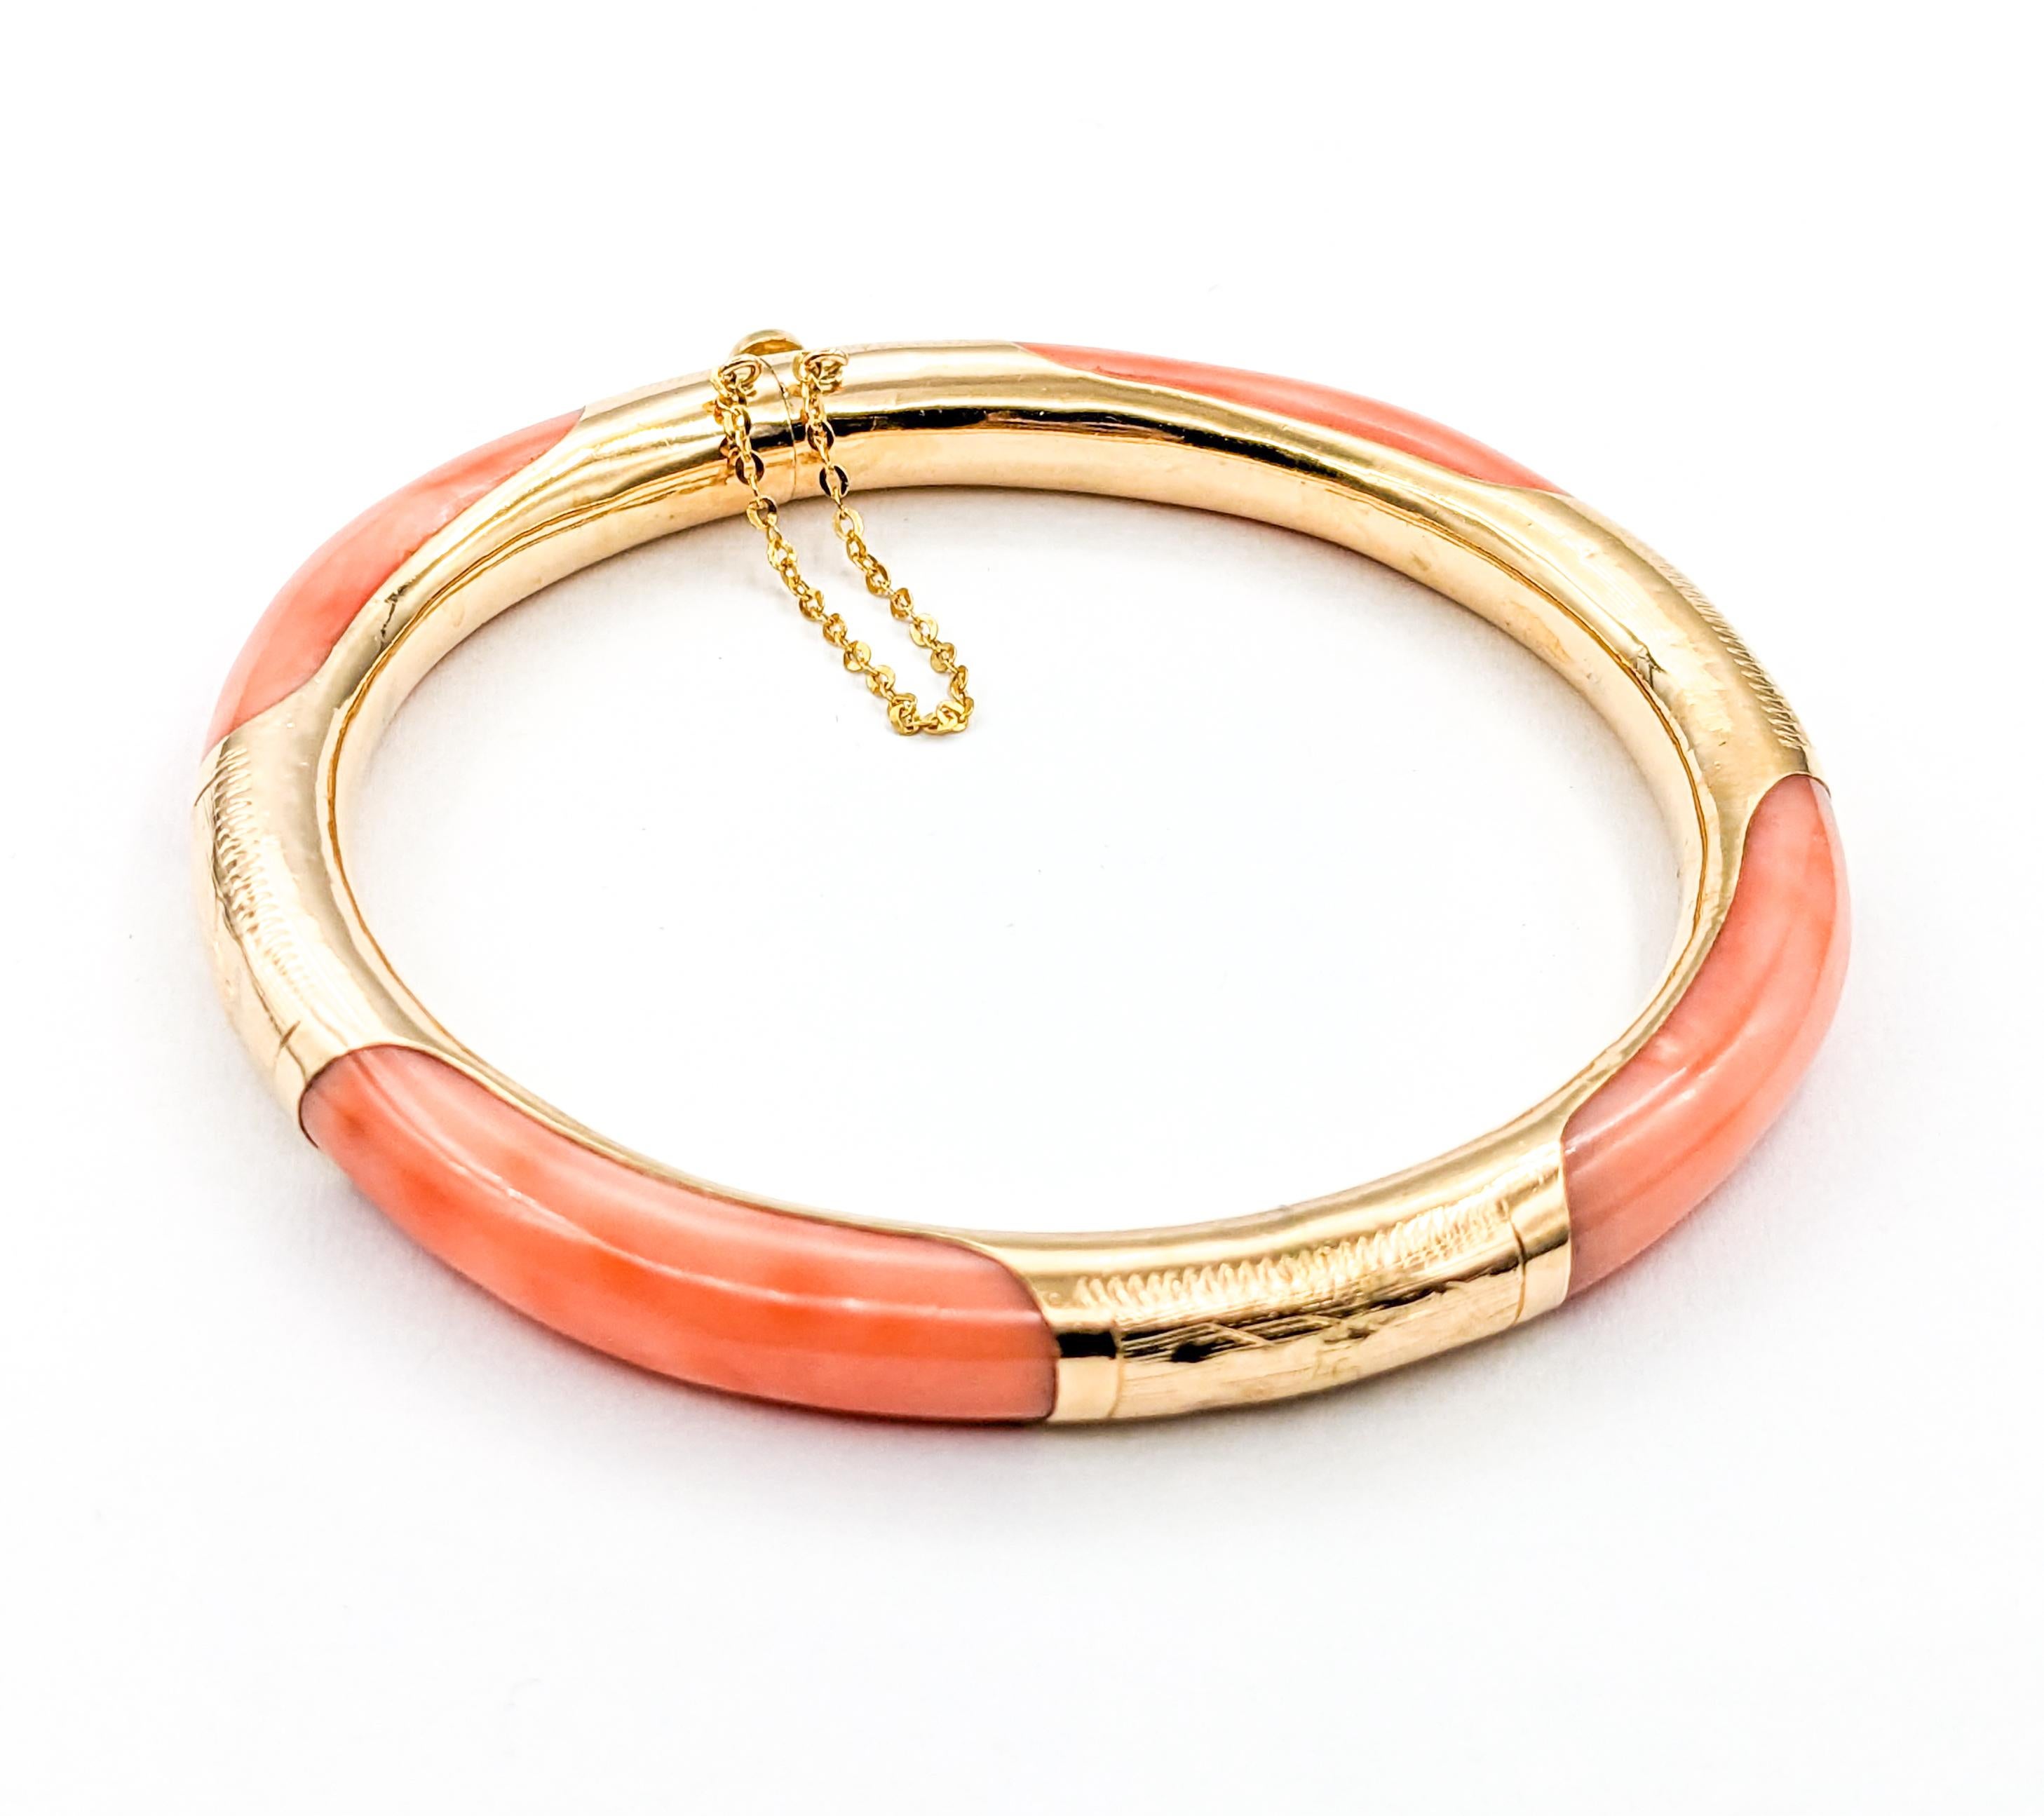 Vintage Coral Bracelet In Yellow Gold

Discover the charm of a bygone elegance with this beautiful vintage bangle bracelet, masterfully created from 14kt yellow gold. This classic piece is adorned with a striking coral organic gemstone, known for